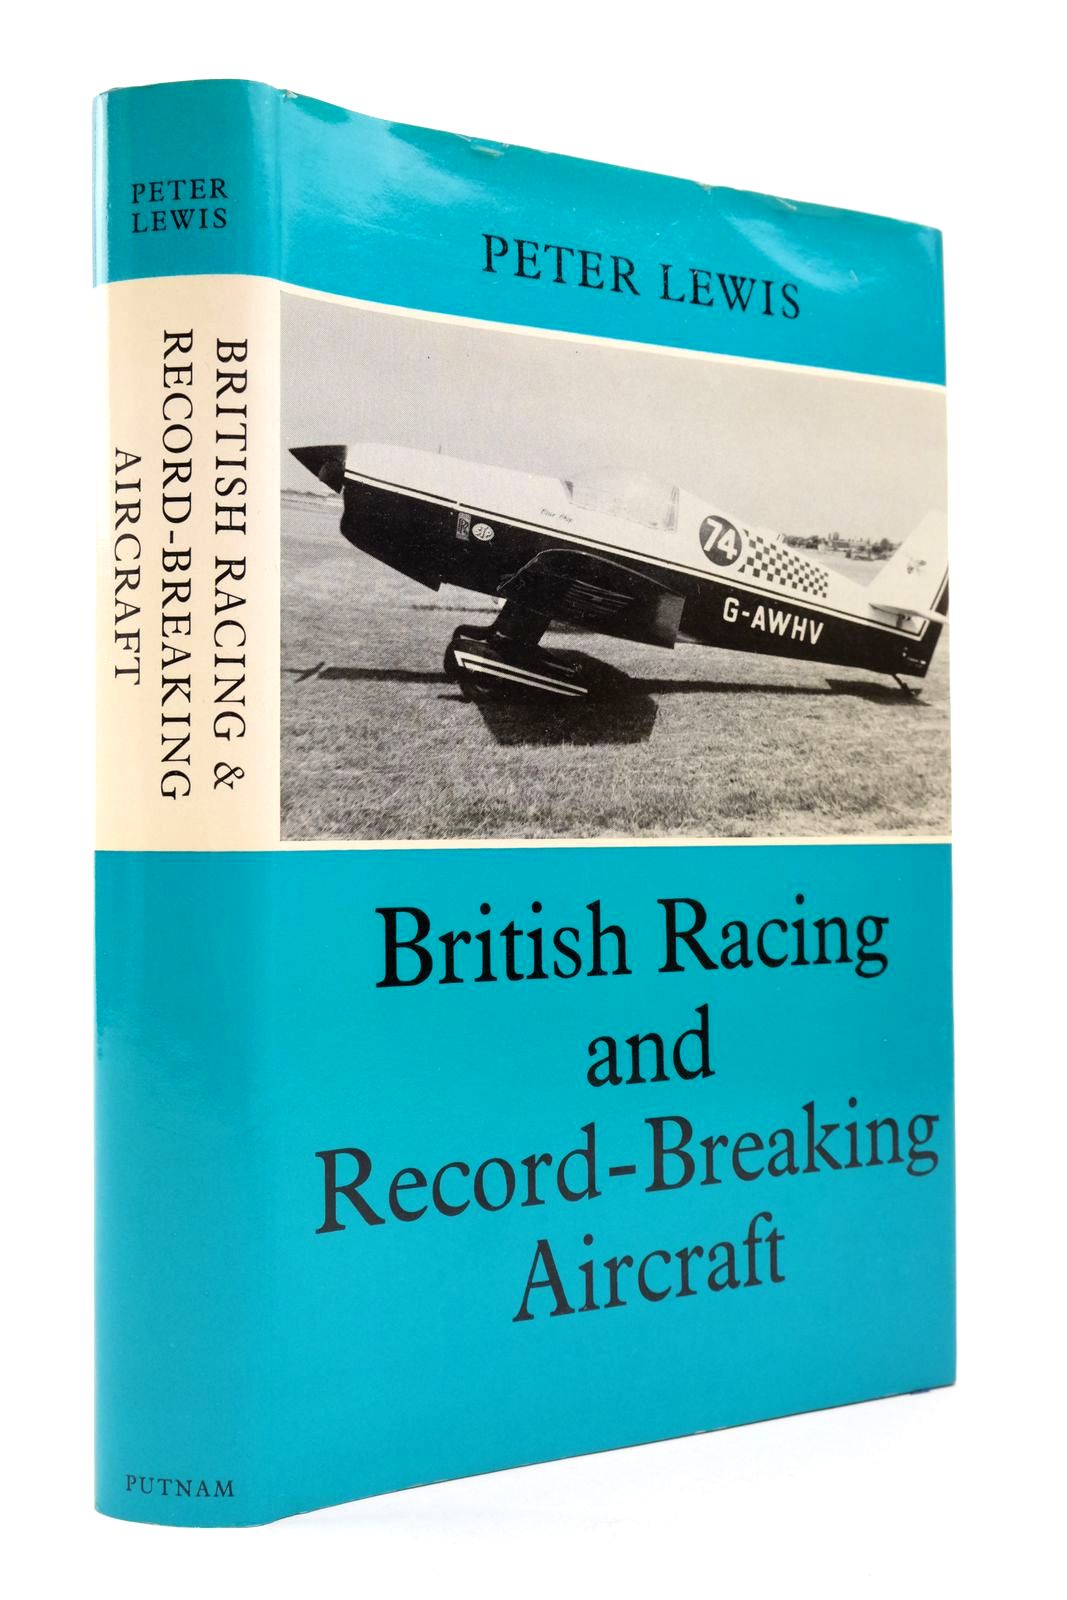 Photo of BRITISH RACING AND RECORD-BREAKING AIRCRAFT written by Lewis, Peter published by Putnam (STOCK CODE: 2138425)  for sale by Stella & Rose's Books